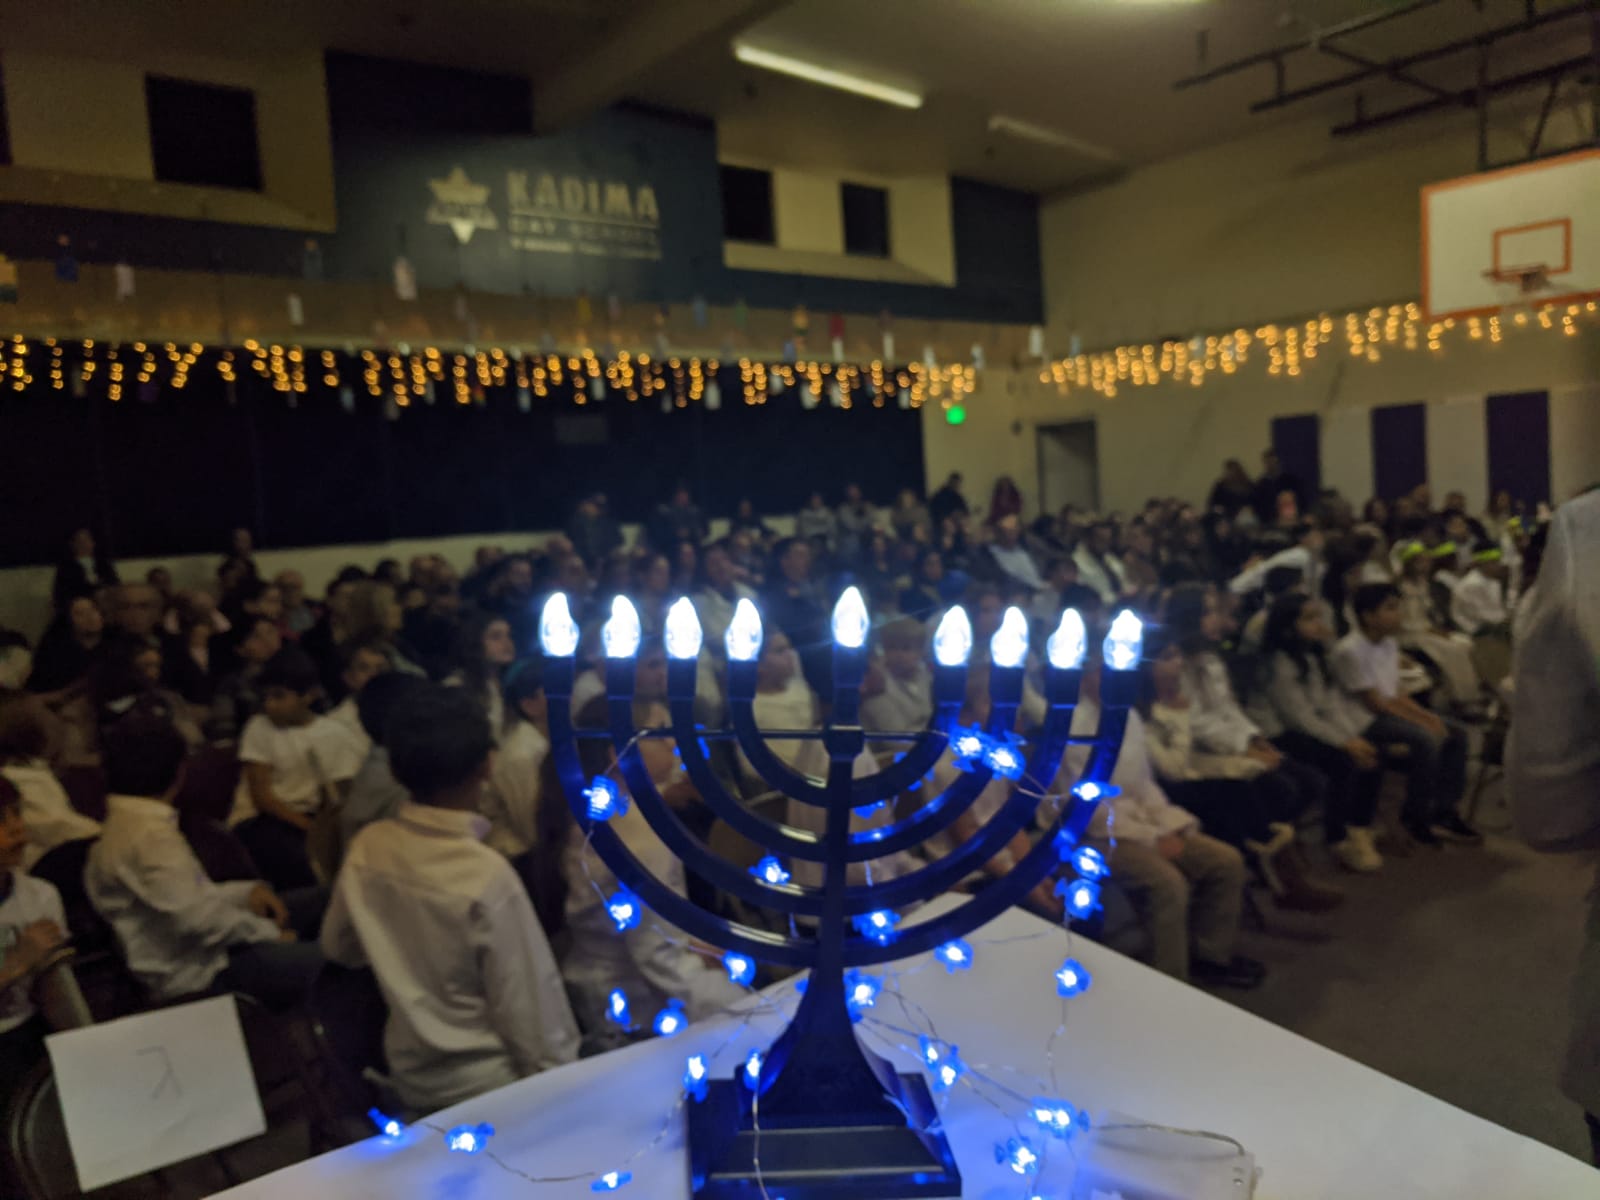 Black menorah with white and blue lights